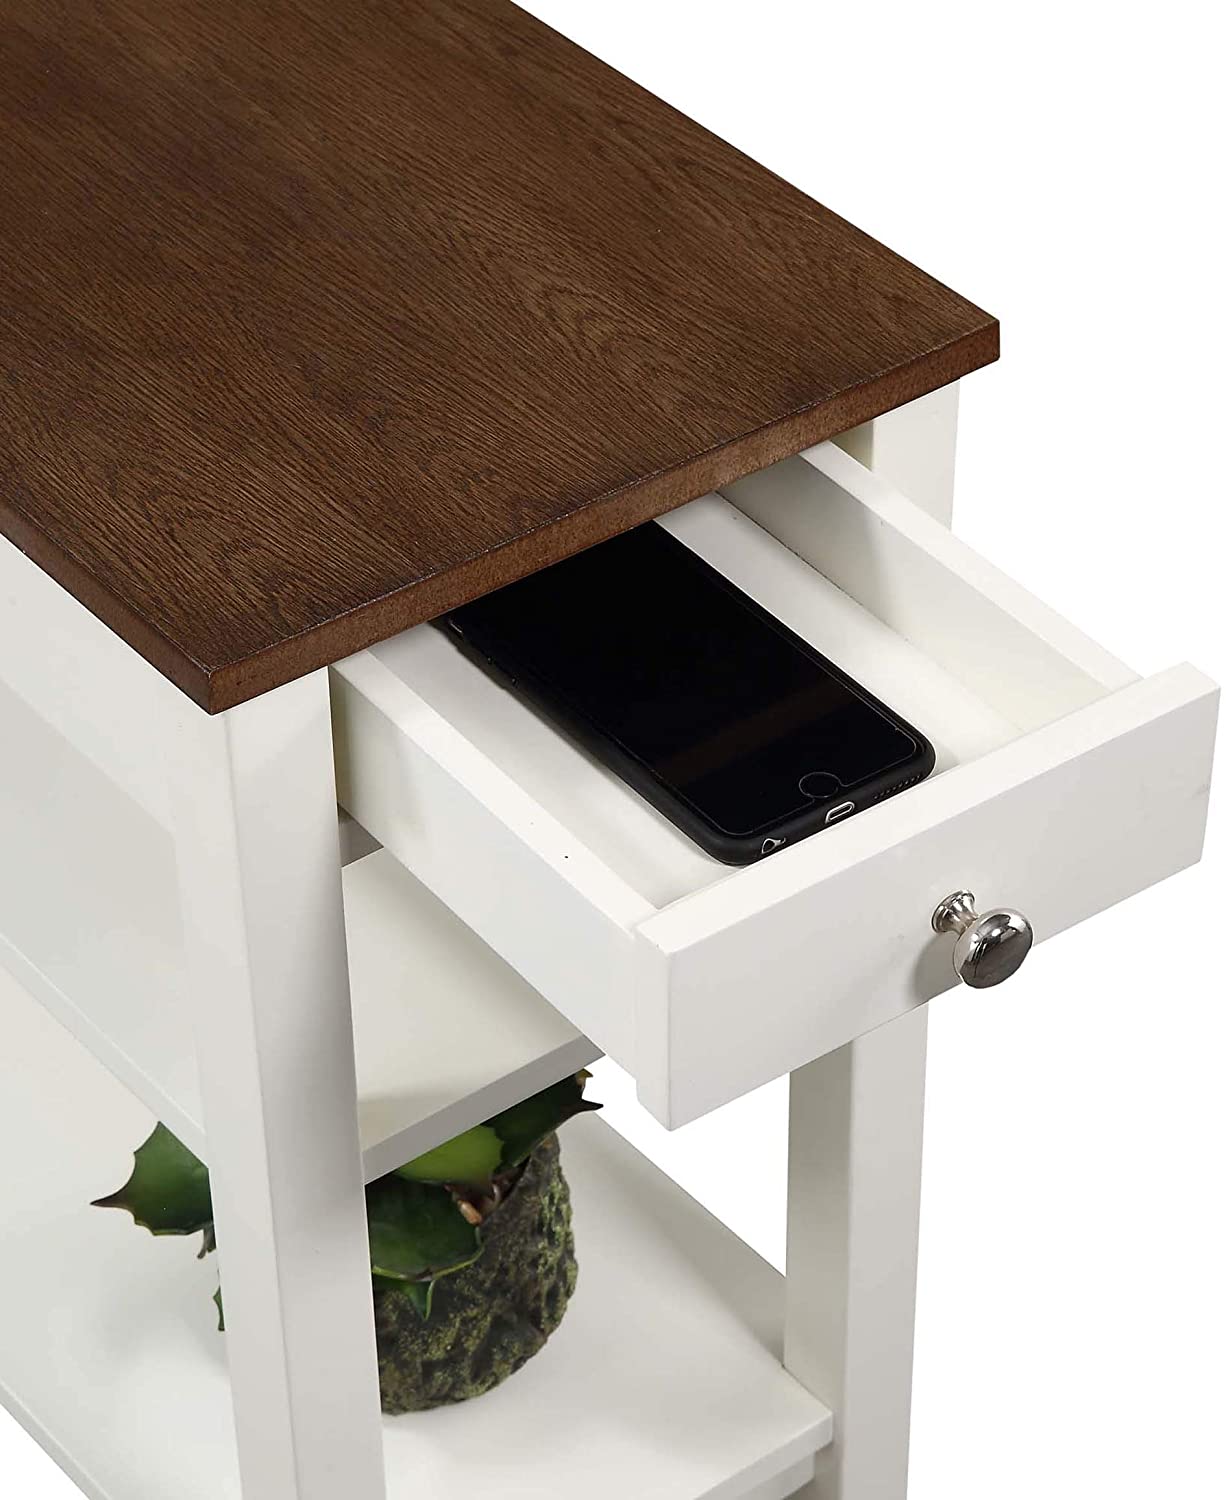 Side Tables : American Heritage Three Tier End Table with Drawer